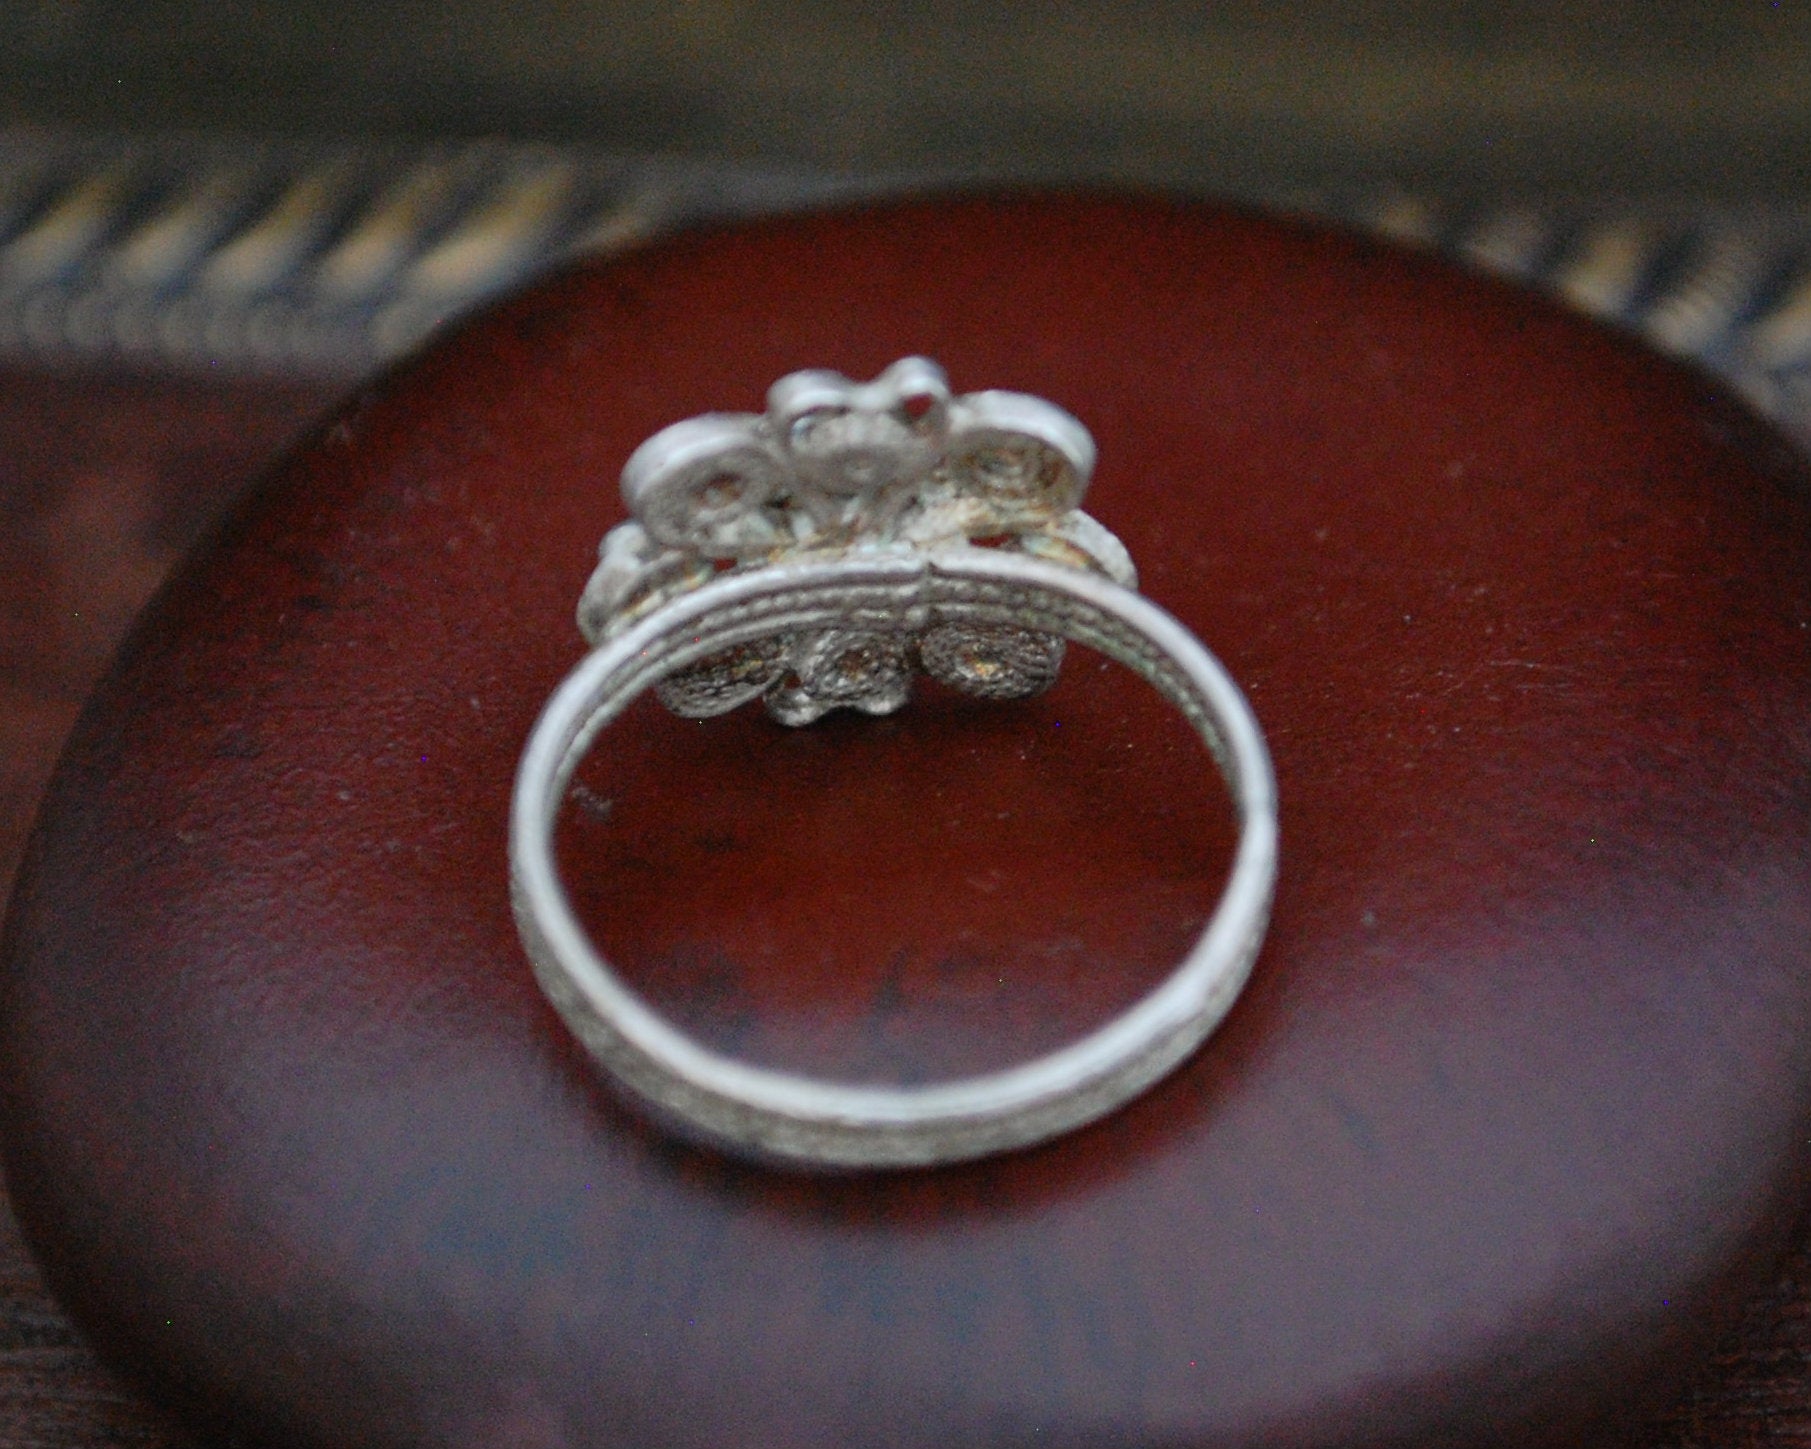 Old Croatian Filigree Coral Ring - Size 7